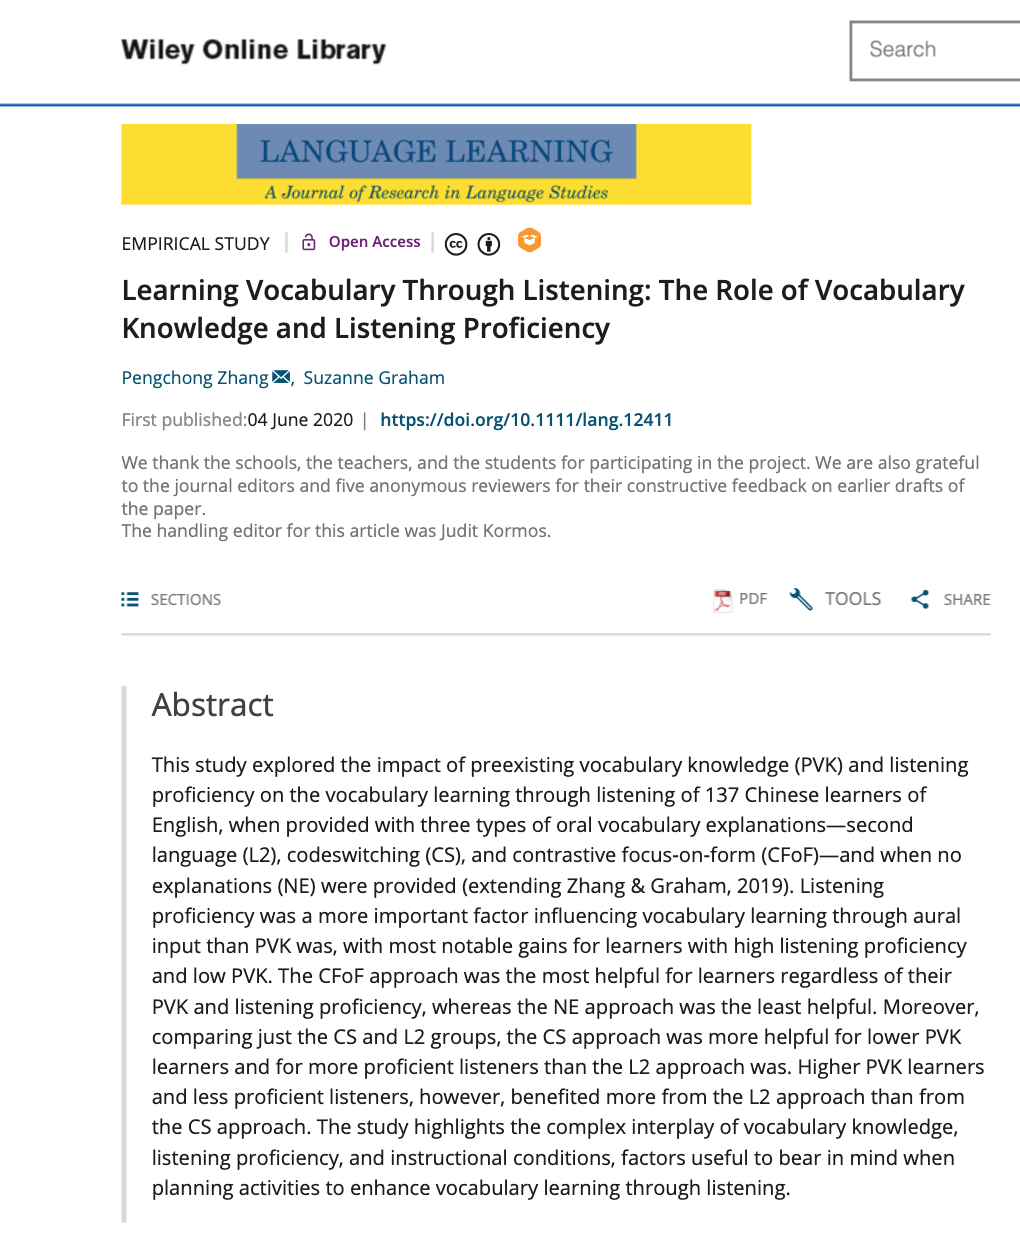 NEWS – A co-authored research article by Dr. Pengchong (Anthony) Zhang (Lecturer of Second Language Learning) and Prof. Suzanne Graham (Professor of Language and Education) has recently been published in Language Learning